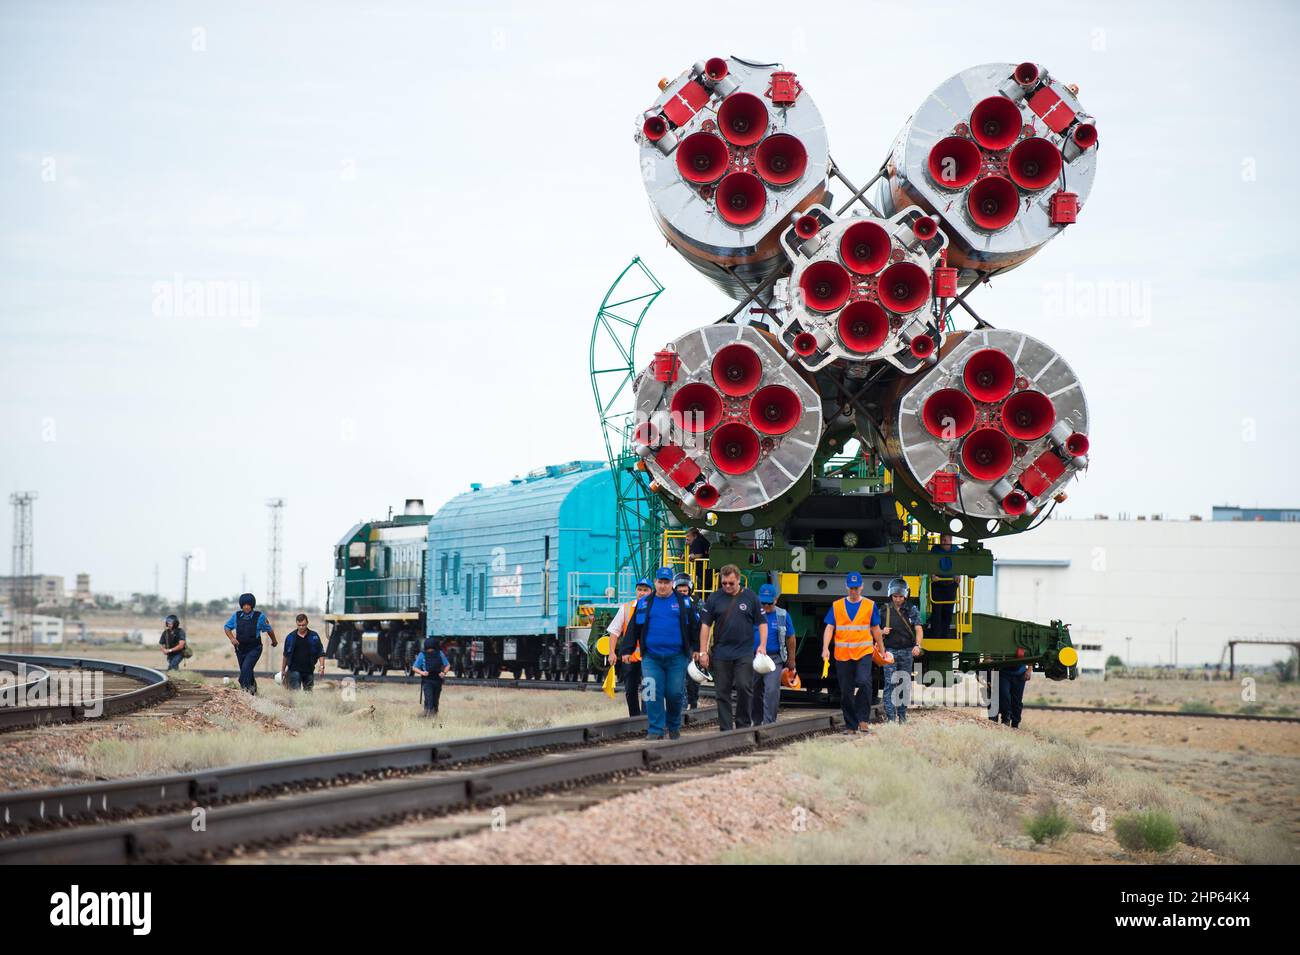 The Soyuz TMA-17M spacecraft is rolled out to the launch pad by train on Monday, July 20, 2015 at the Baikonur Cosmodrome in Kazakhstan Stock Photo